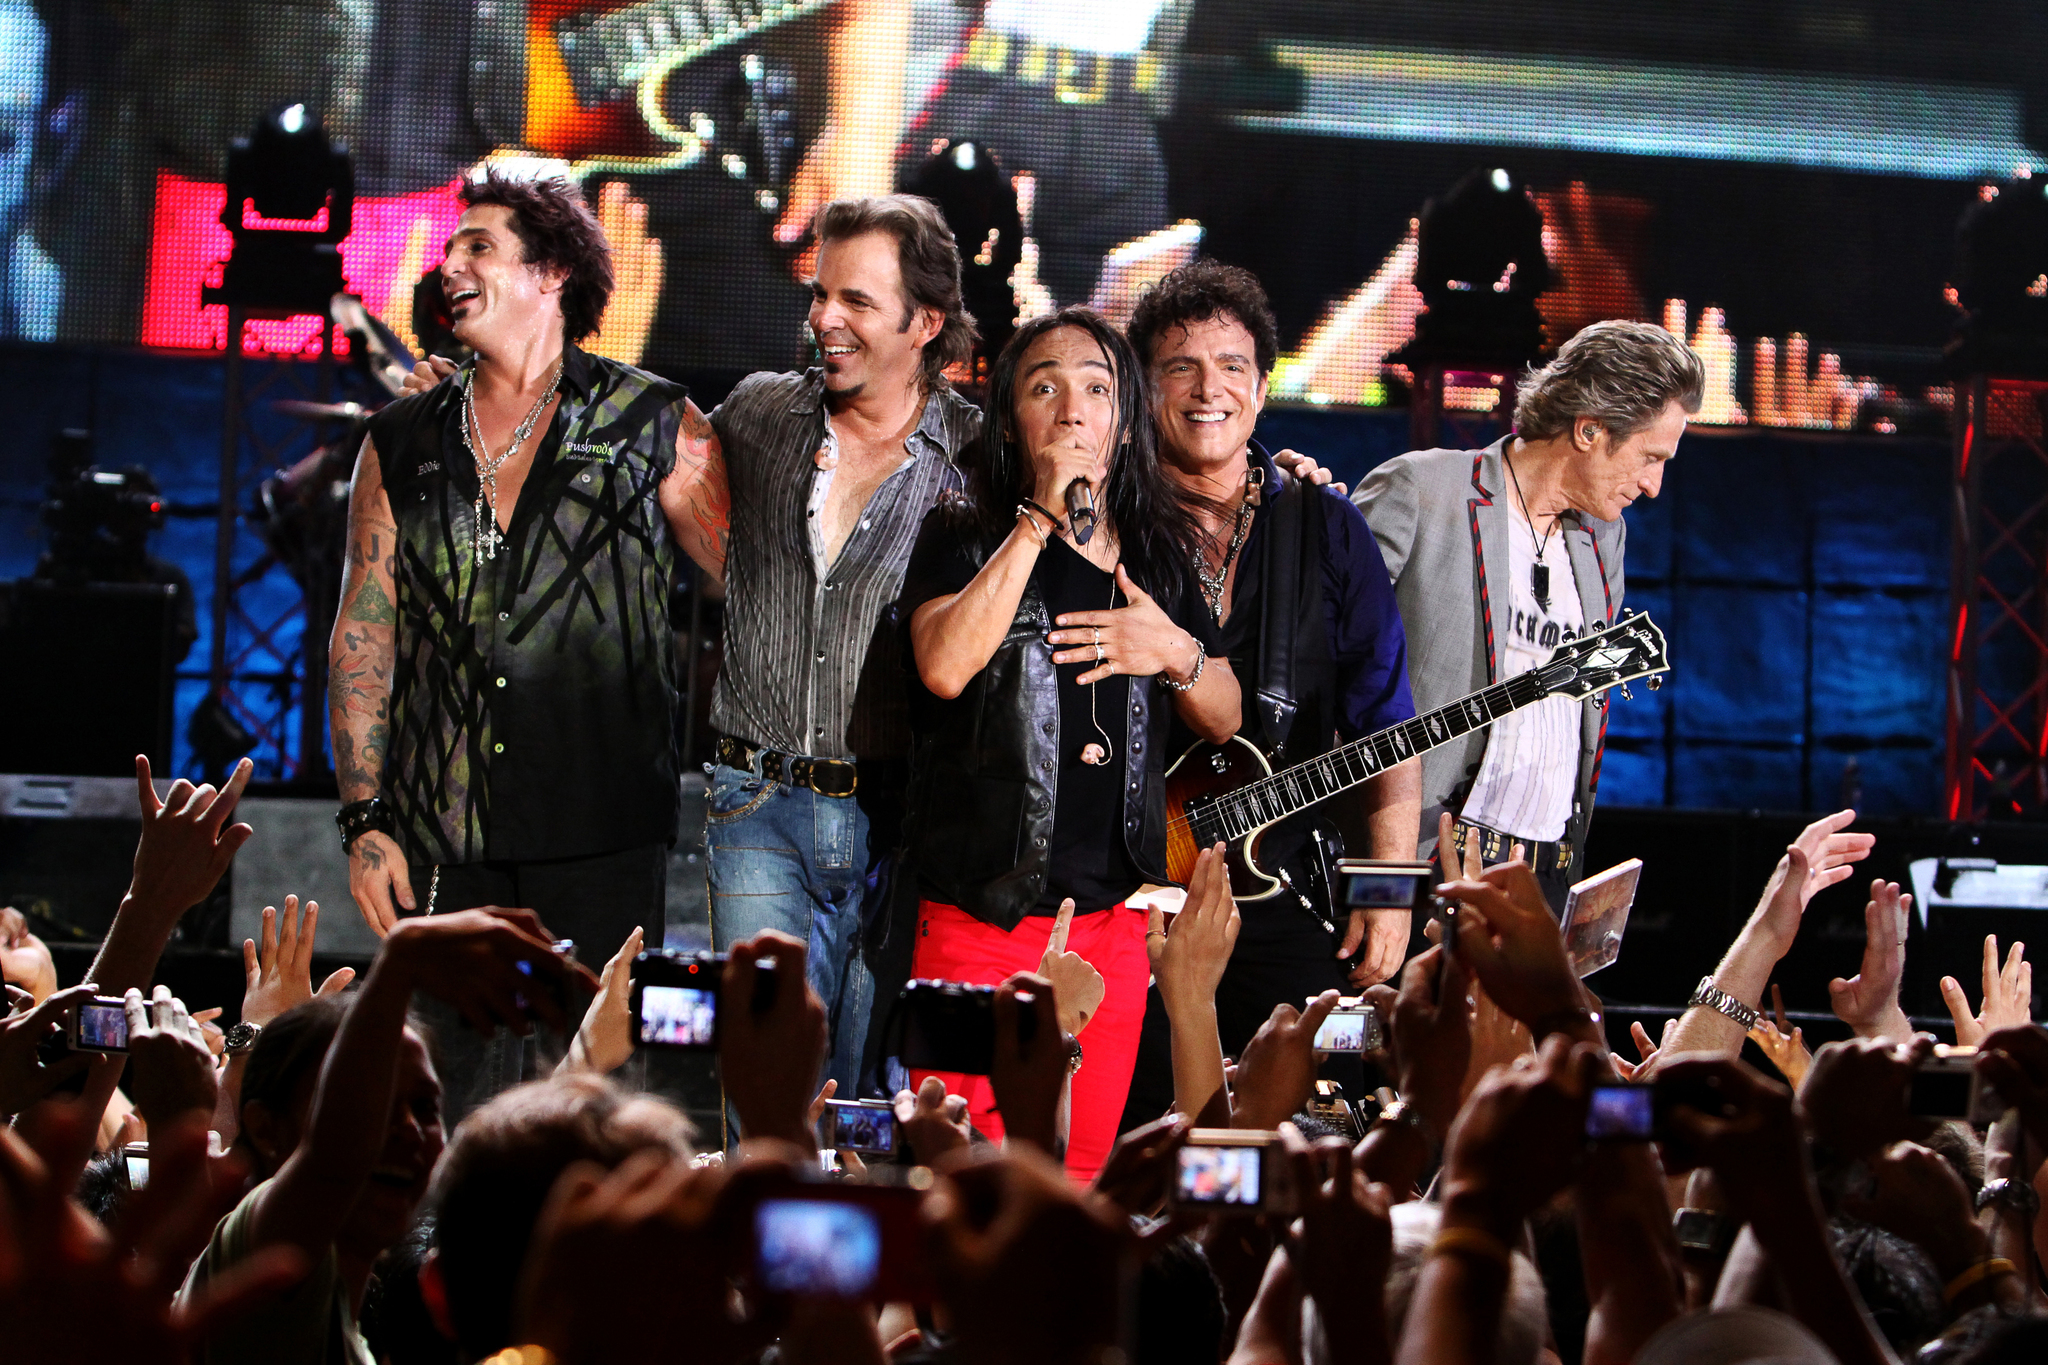 Still of Jonathan Cain, Neal Schon, Ross Valory, Deen Castronovo and Arnel Pineda in Don't Stop Believin': Everyman's Journey (2012)